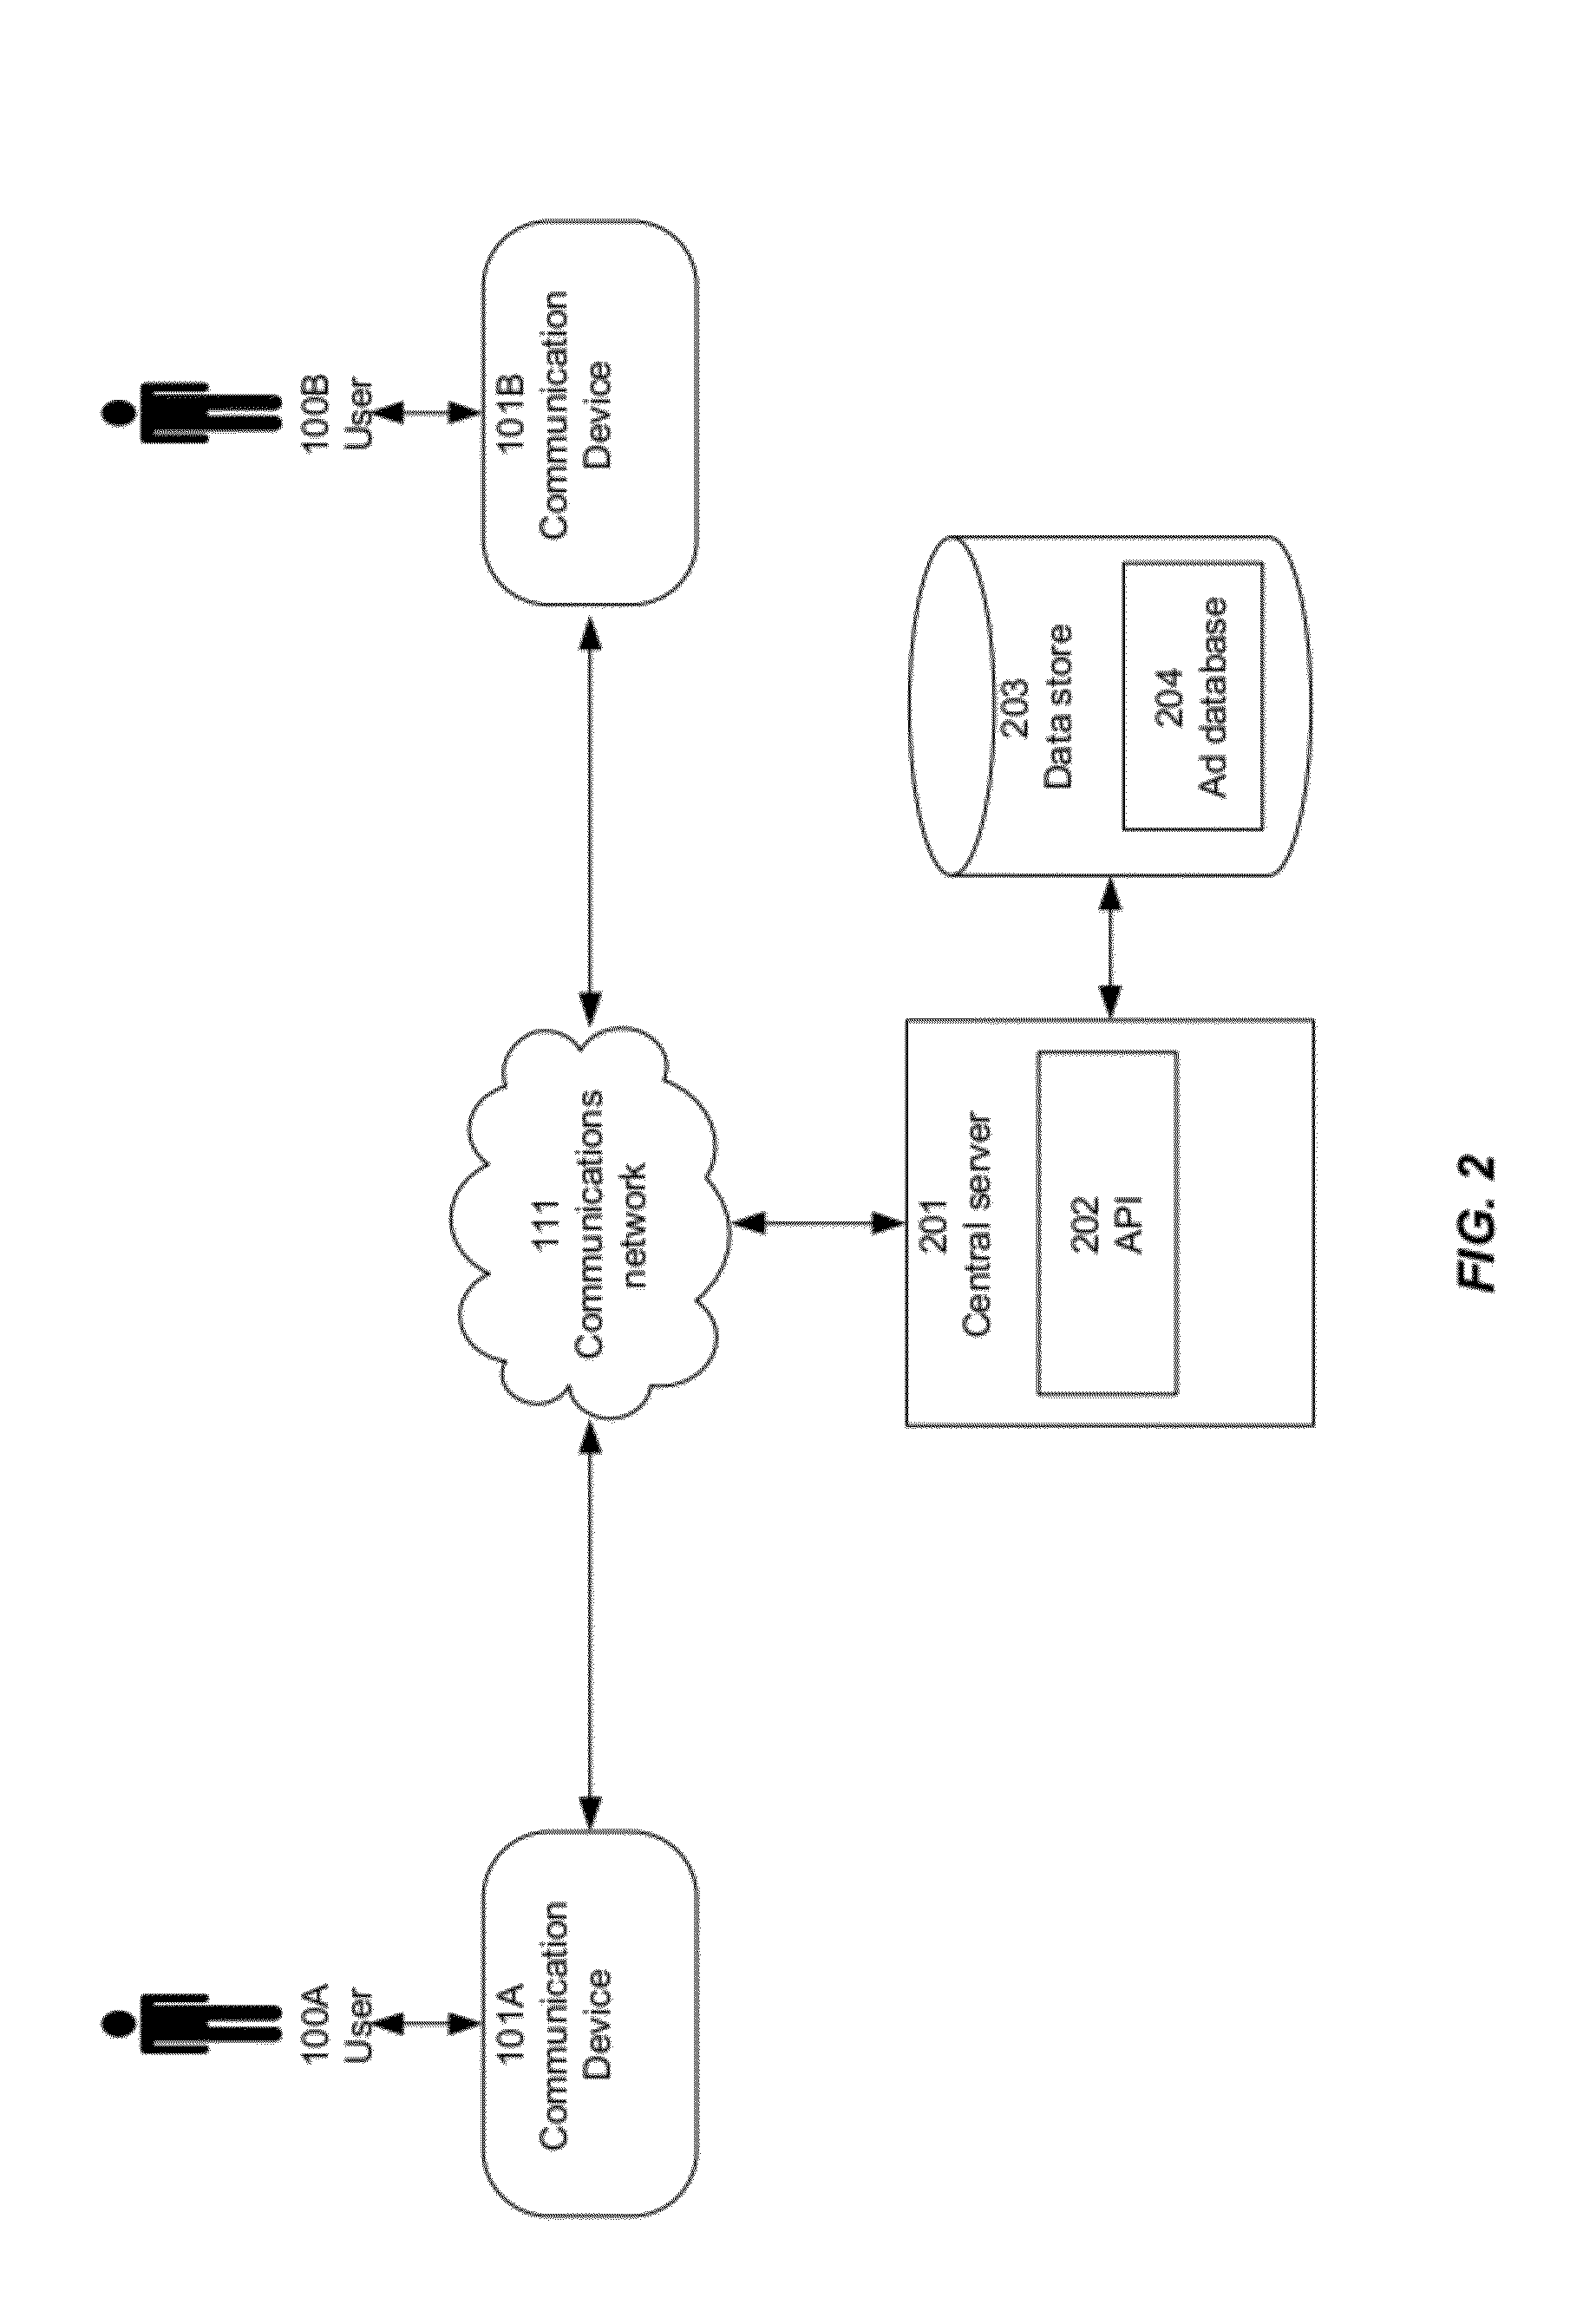 System and Method For Including Advertisements In Electronic Communications